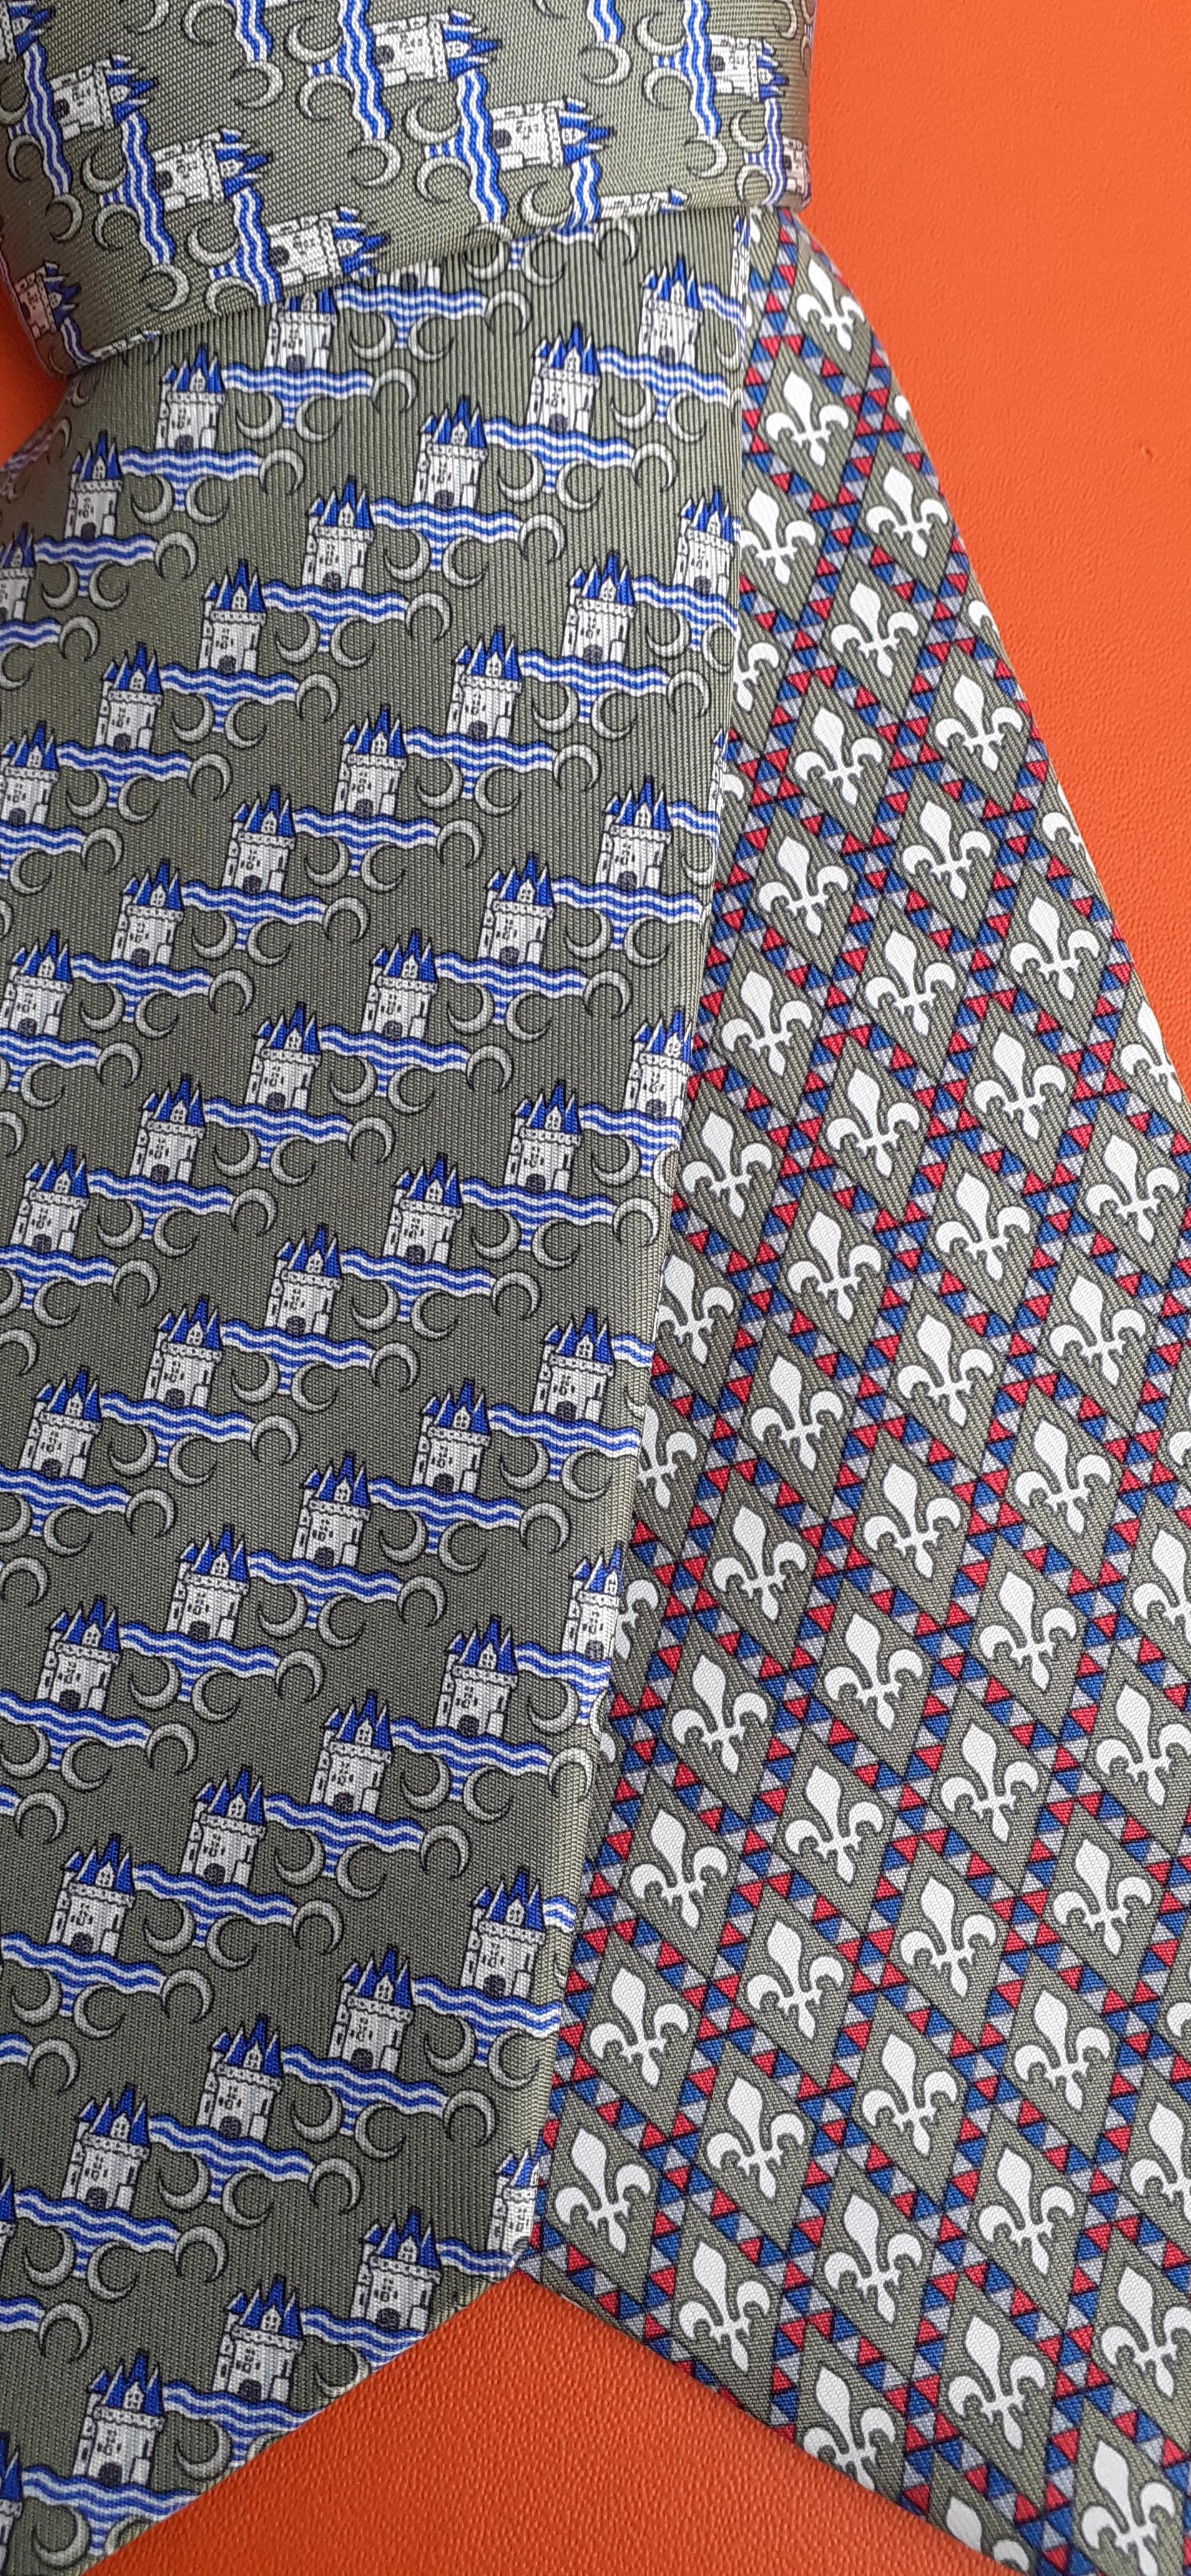 Set of 2 Beautiful and Rare Authentic Hermès Ties

Castle matches Fleur-de-lis, because the fleur-de-lys (in french) is the symbol of the coat of arms of royal France, at the time of the monarchy, kings and castles

Left one: Castles print in white